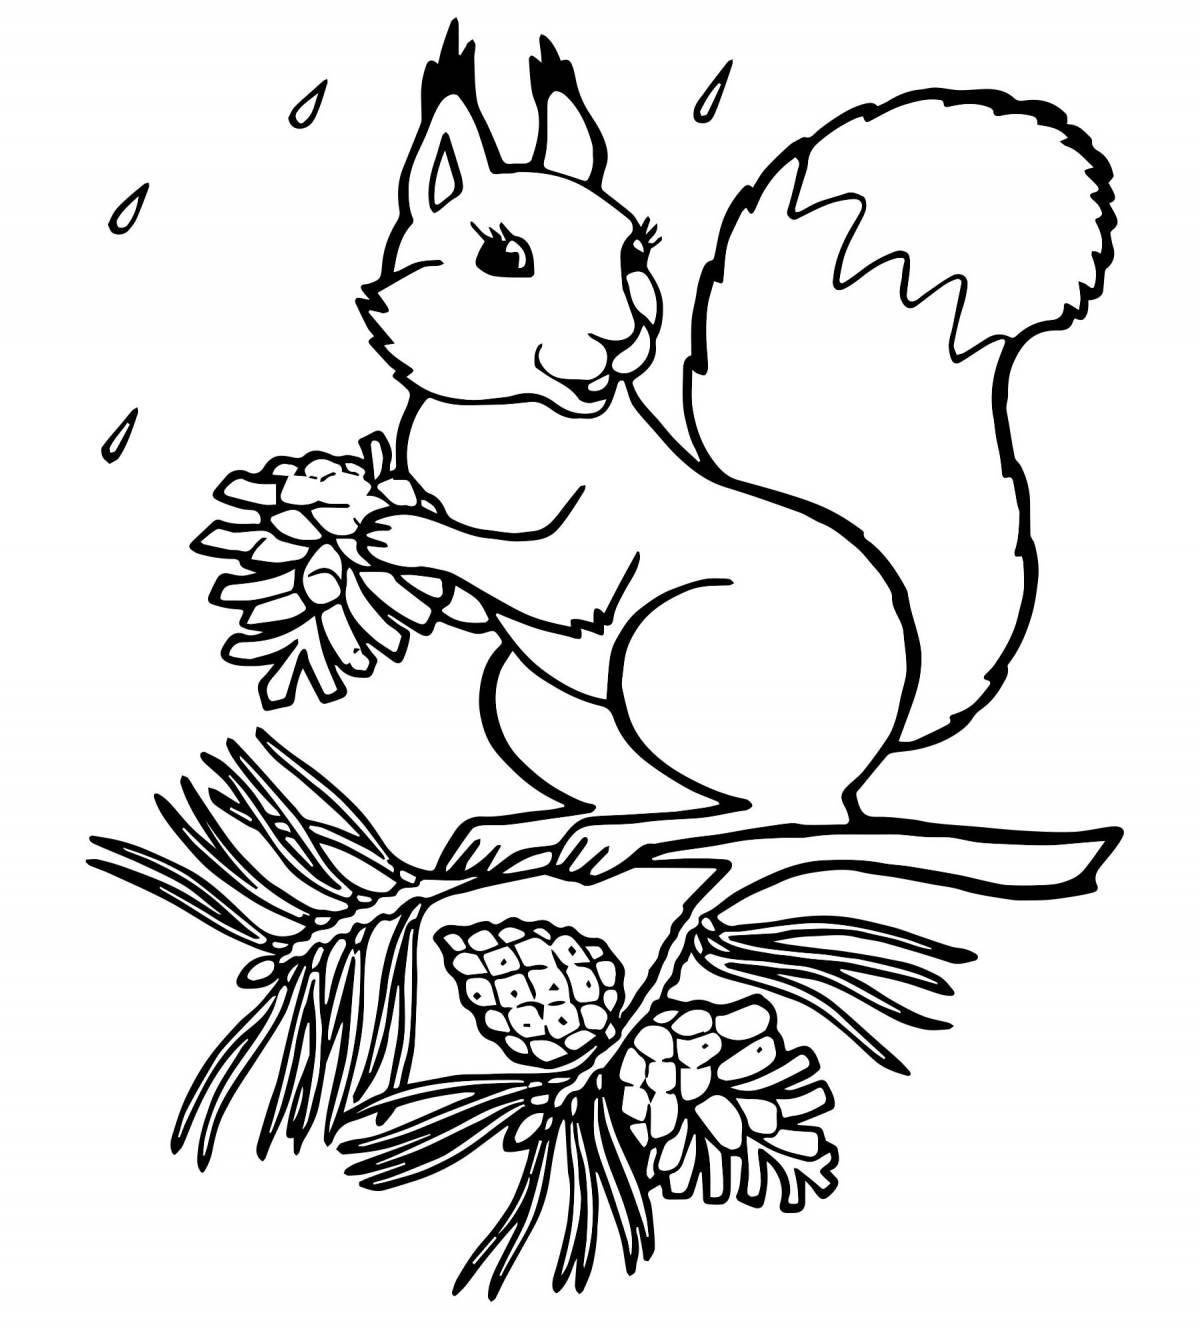 Adorable squirrel coloring book for kids 2-3 years old